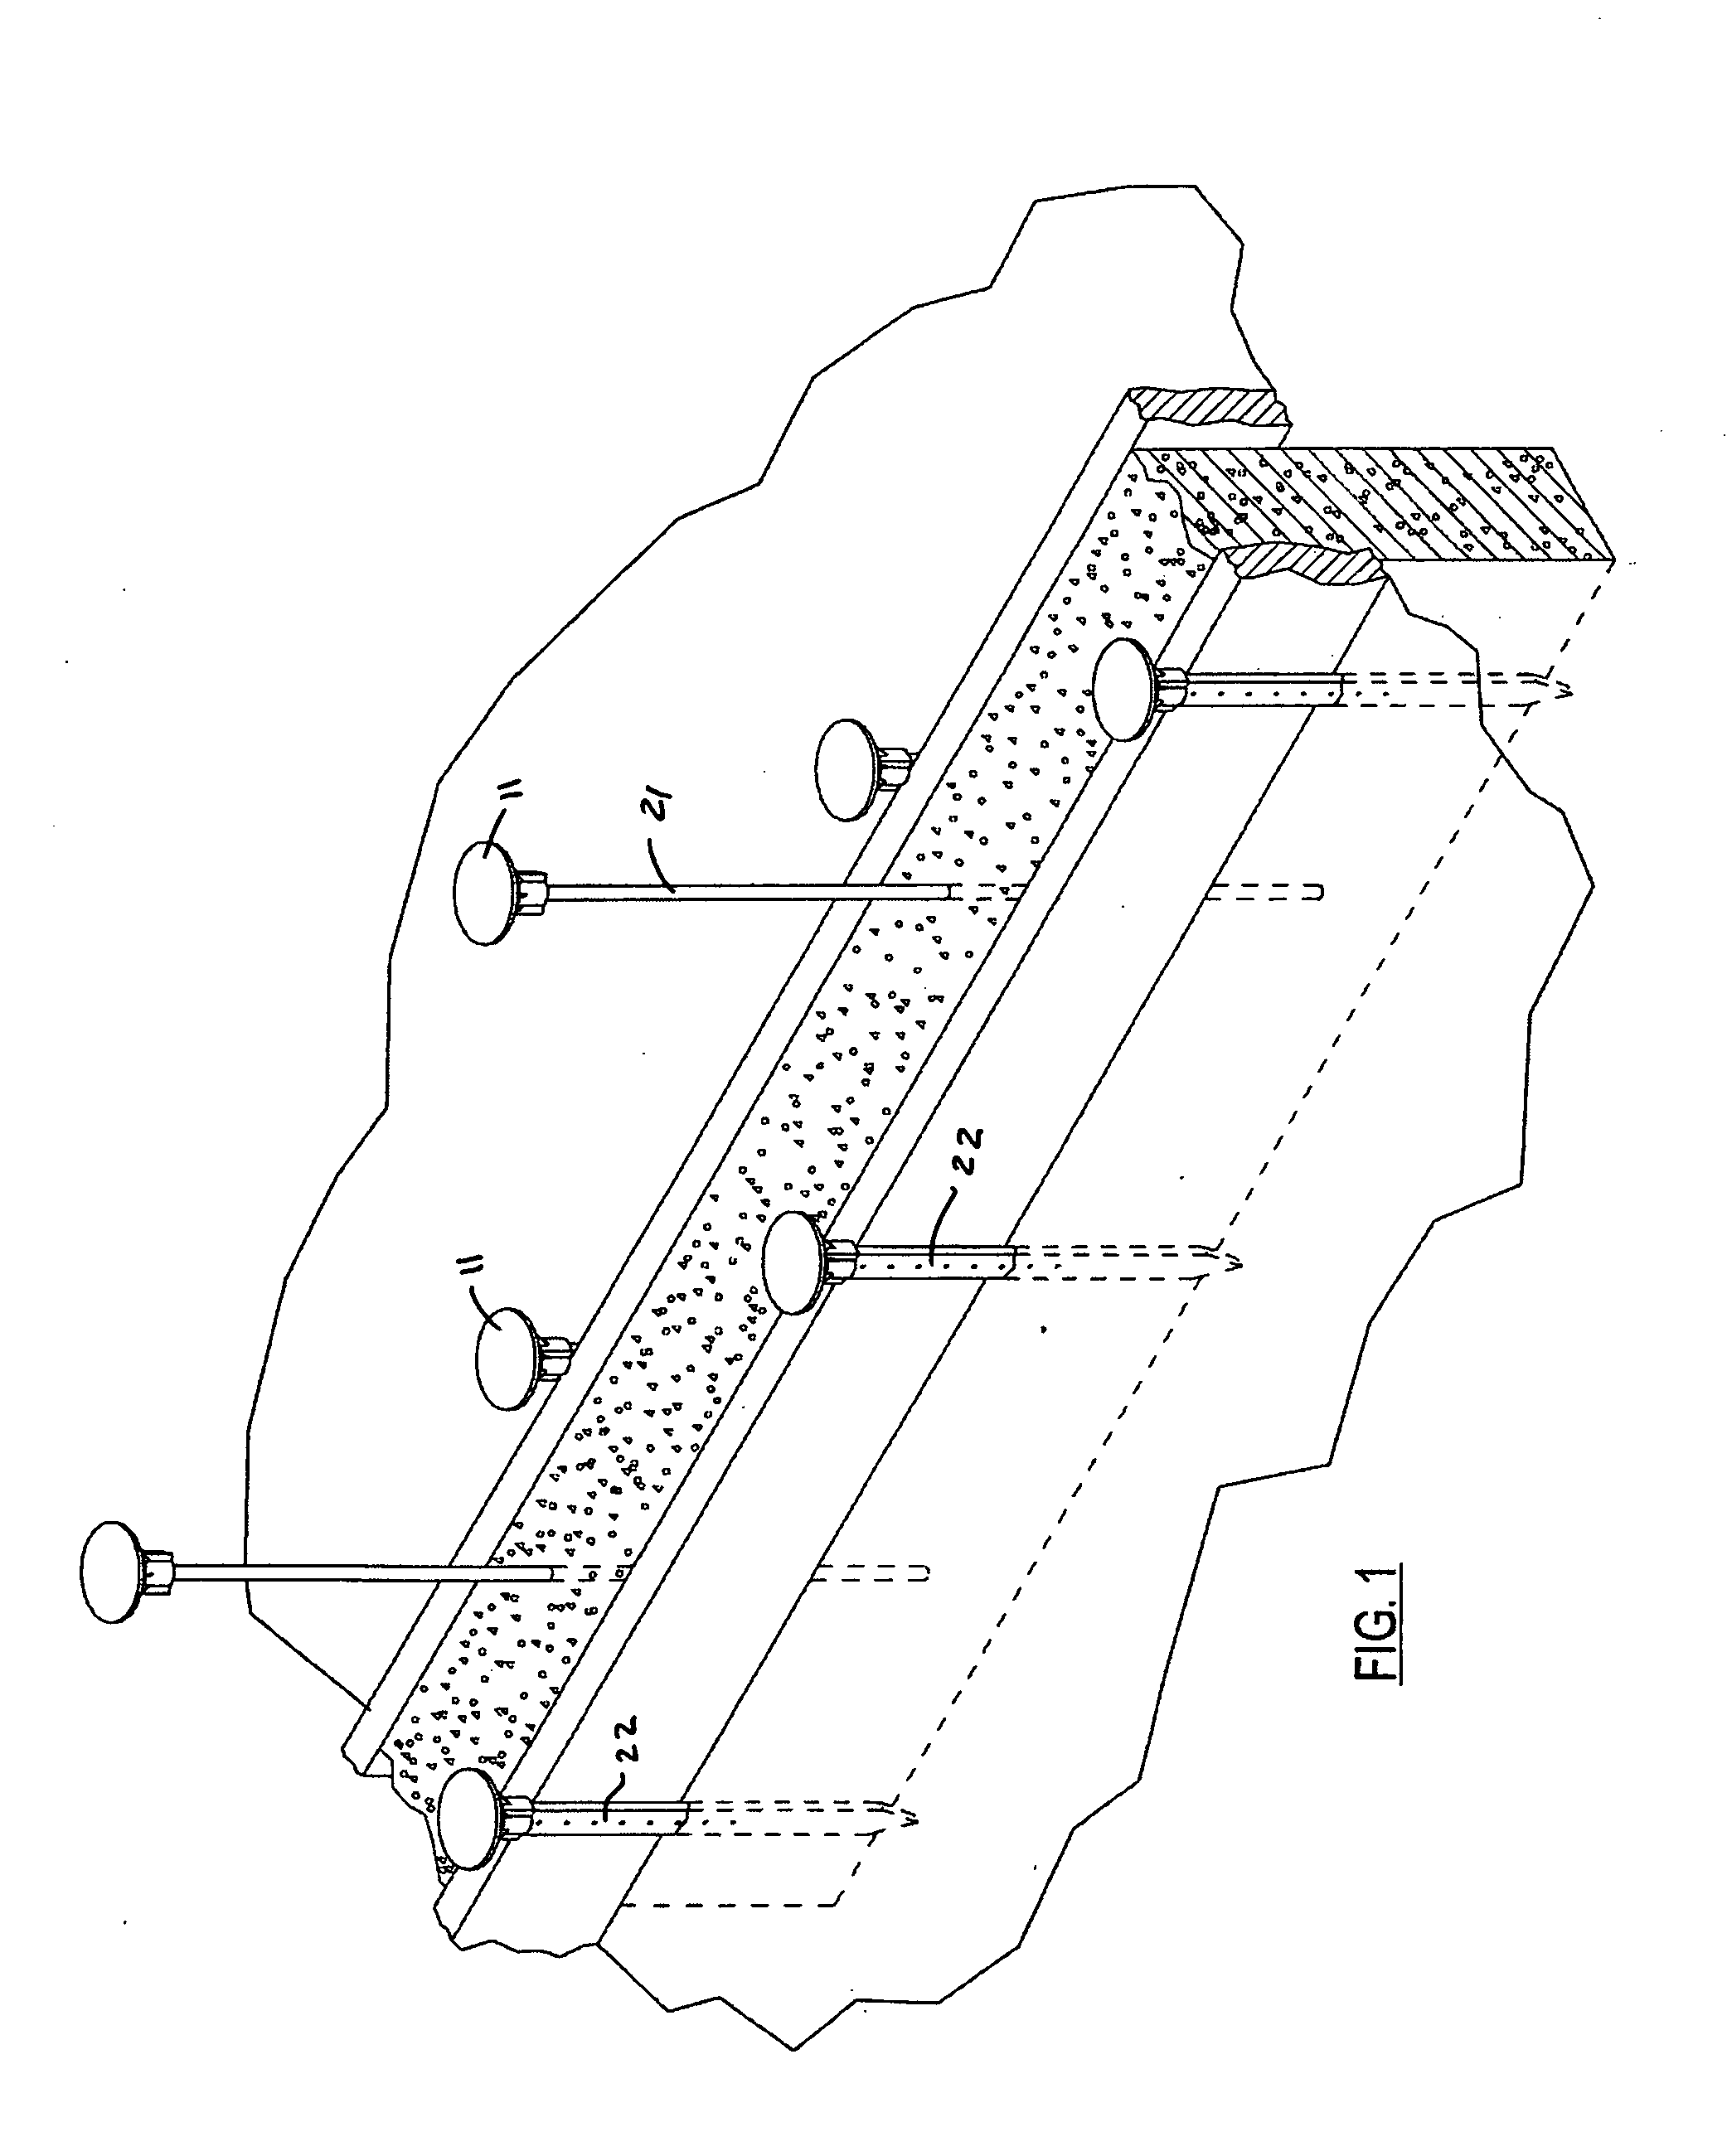 Safety caps for foundation rebar, stakes and anchor bolts and methods of use